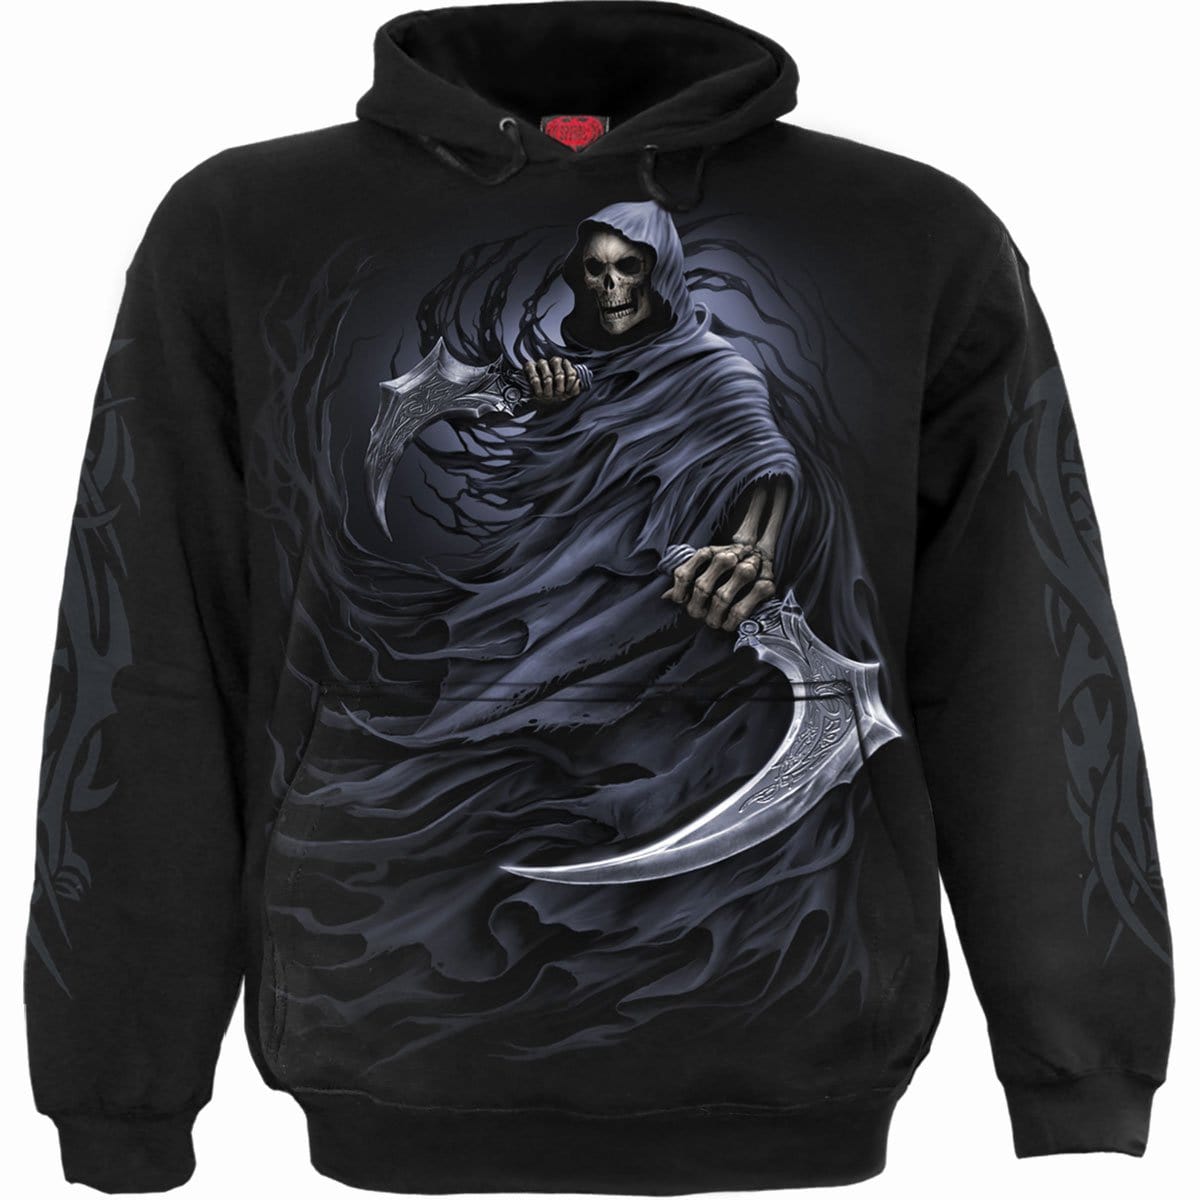 DOUBLE DEATH - Hoody Black - Spiral USA